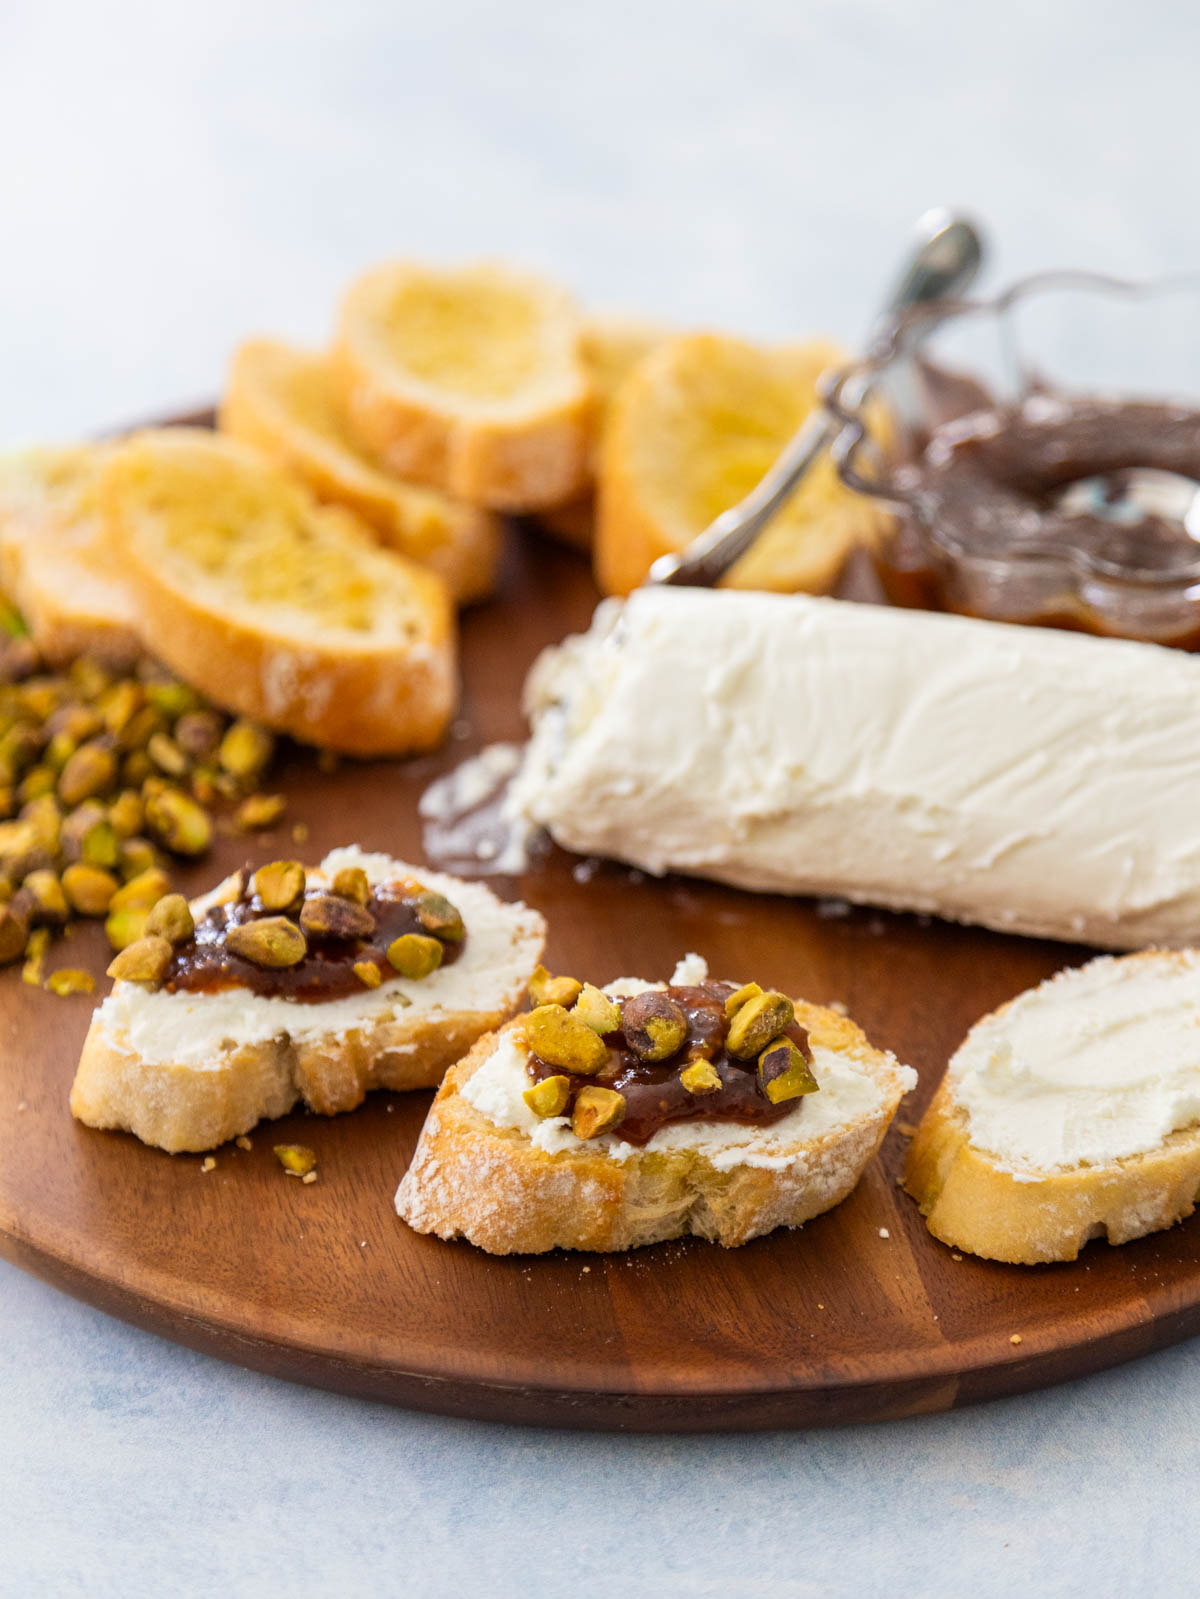 A charcuterie platter has crostini, soft goat cheese, chopped pistachios, and a bowl of fig jam. A few assembled crostini bites are in front.